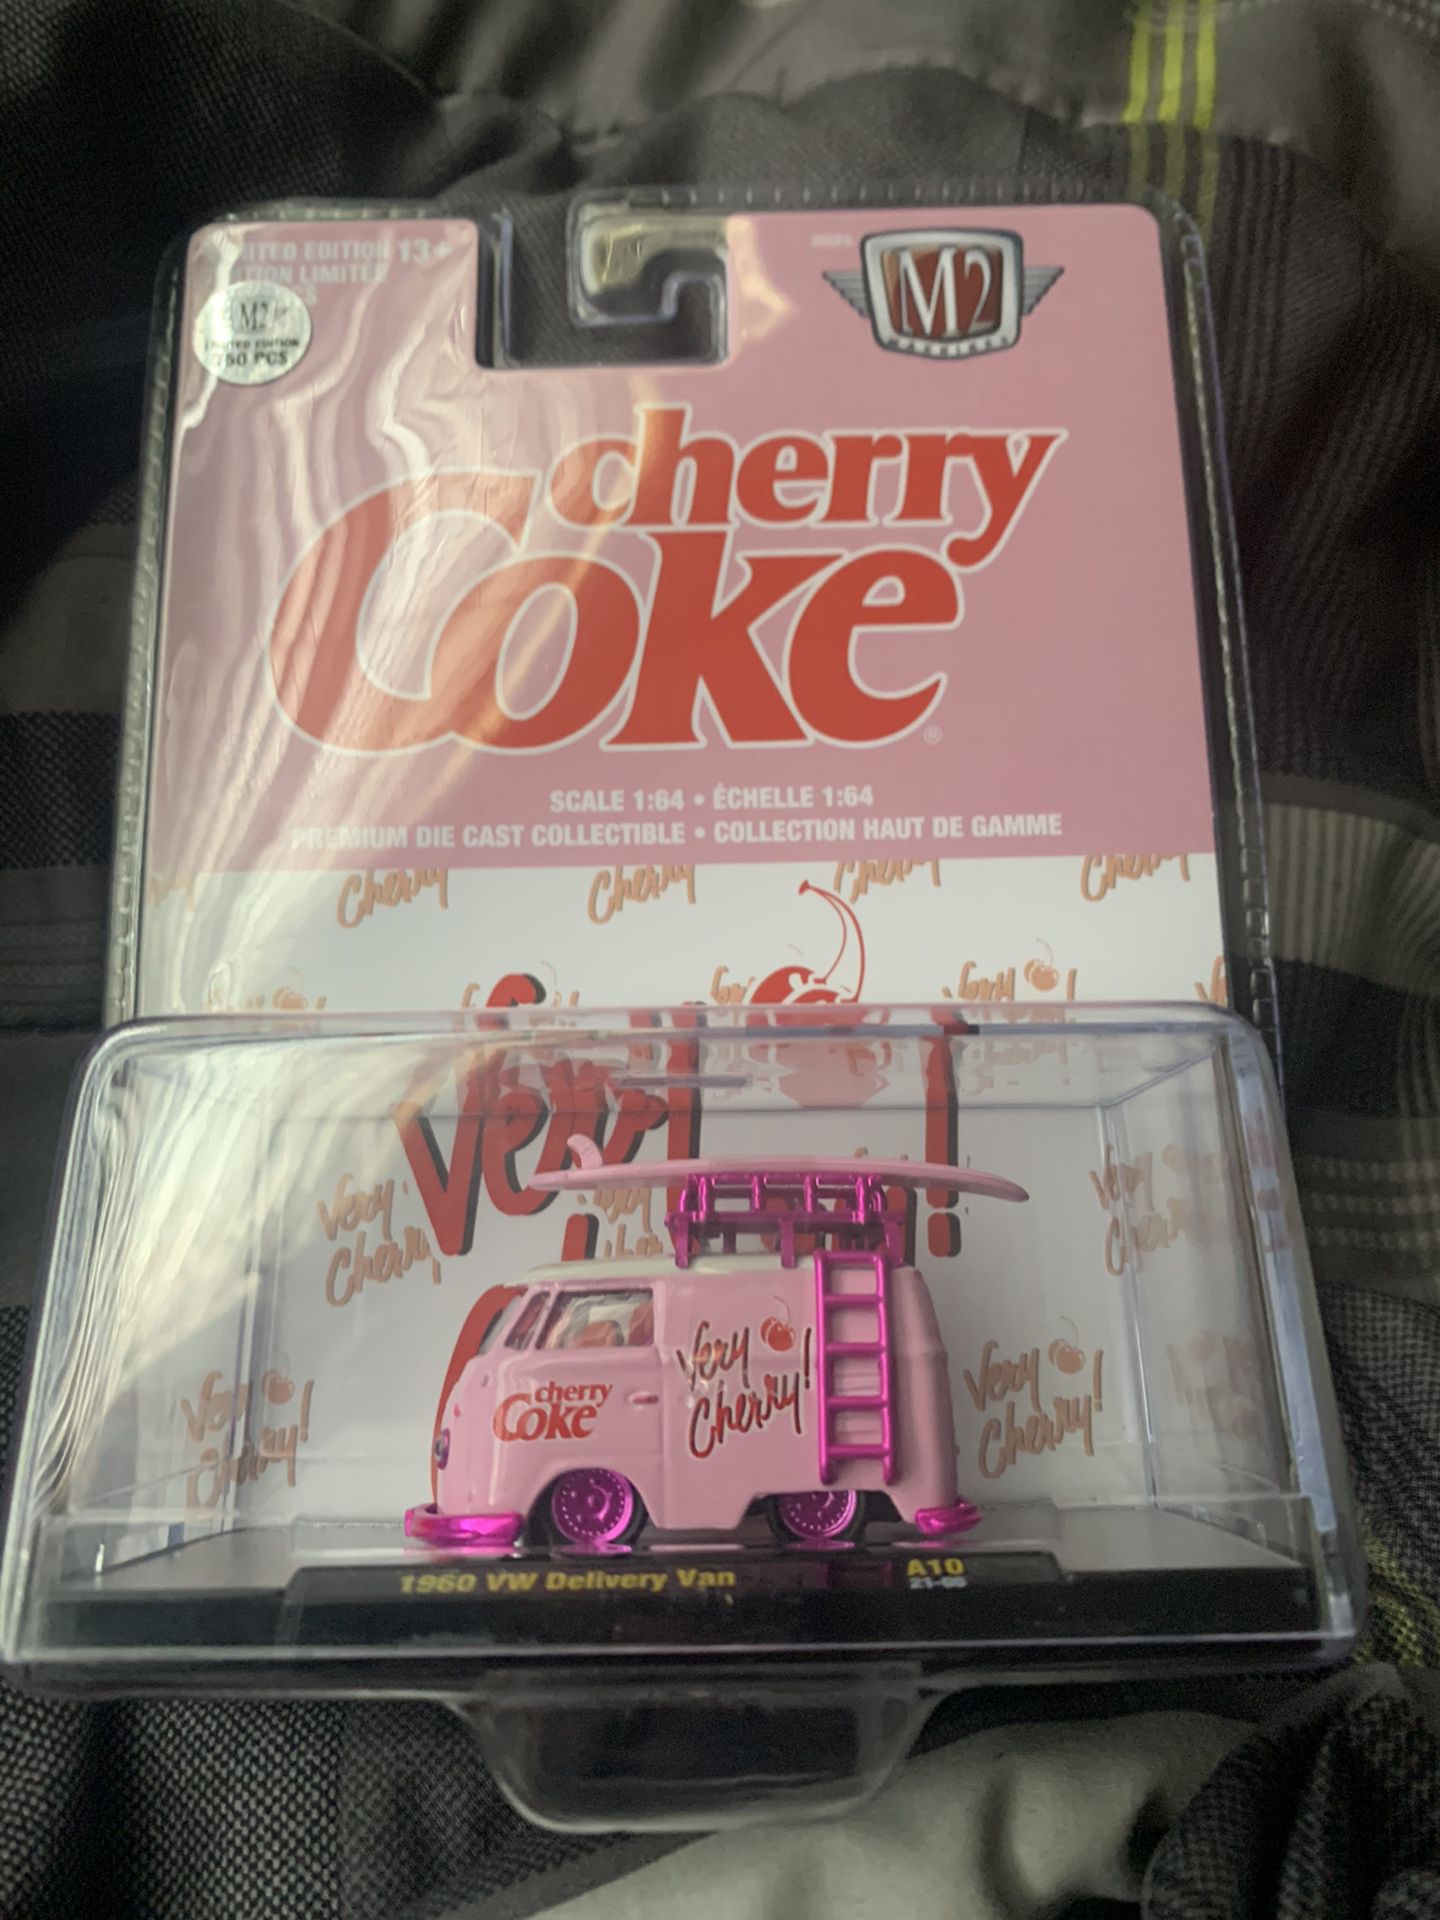 M2 Chase Cherry Coke 1960 VW Delivery Van 1/750 Coca Cola Model Car Diecast Toy